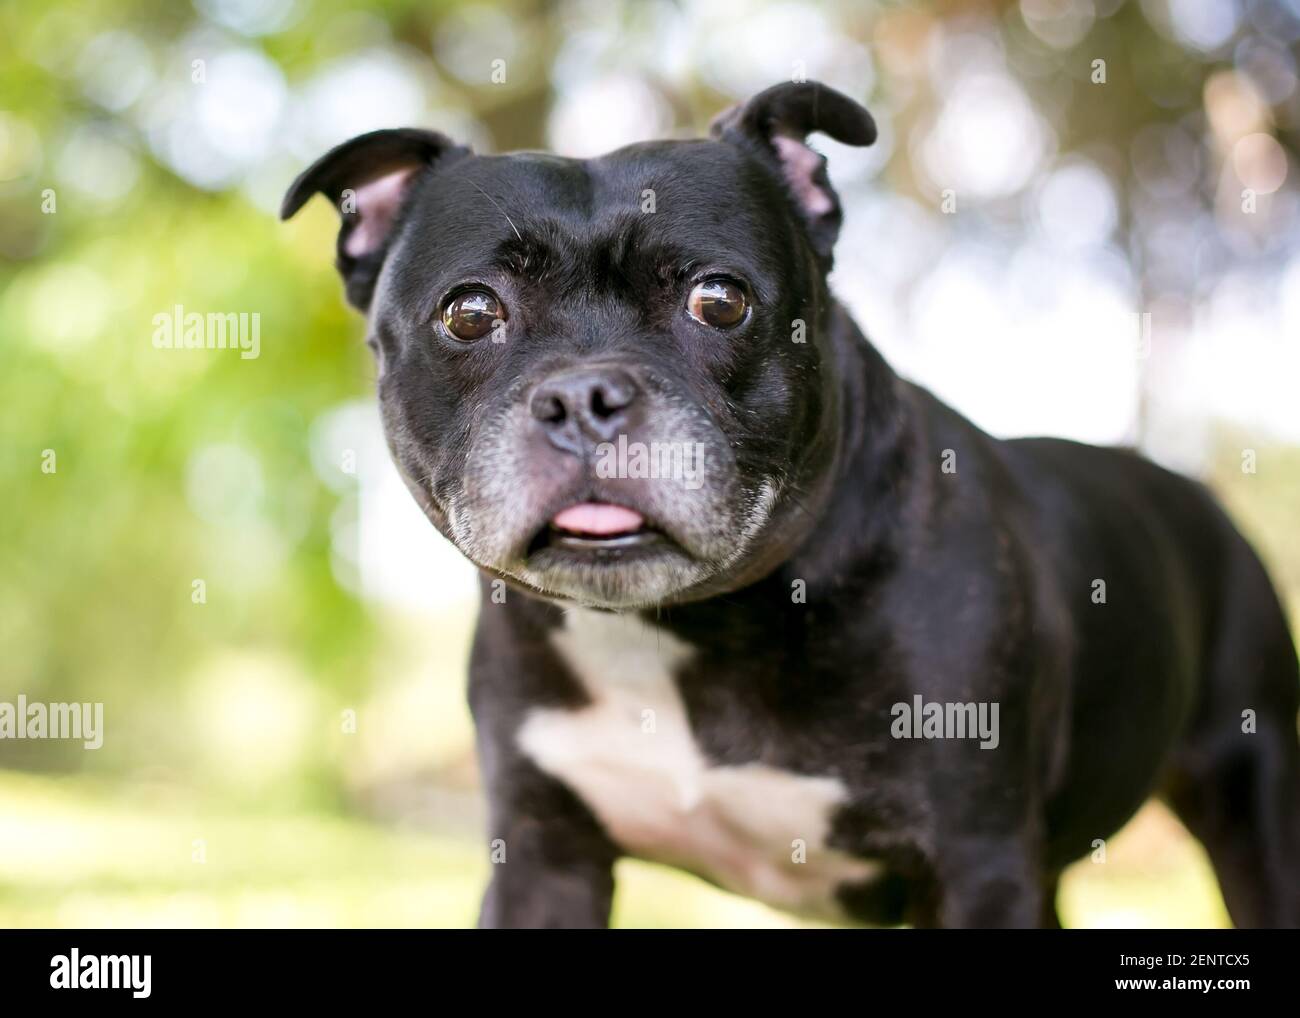 A Boston Terrier mixed breed dog sticking its tongue out Stock Photo